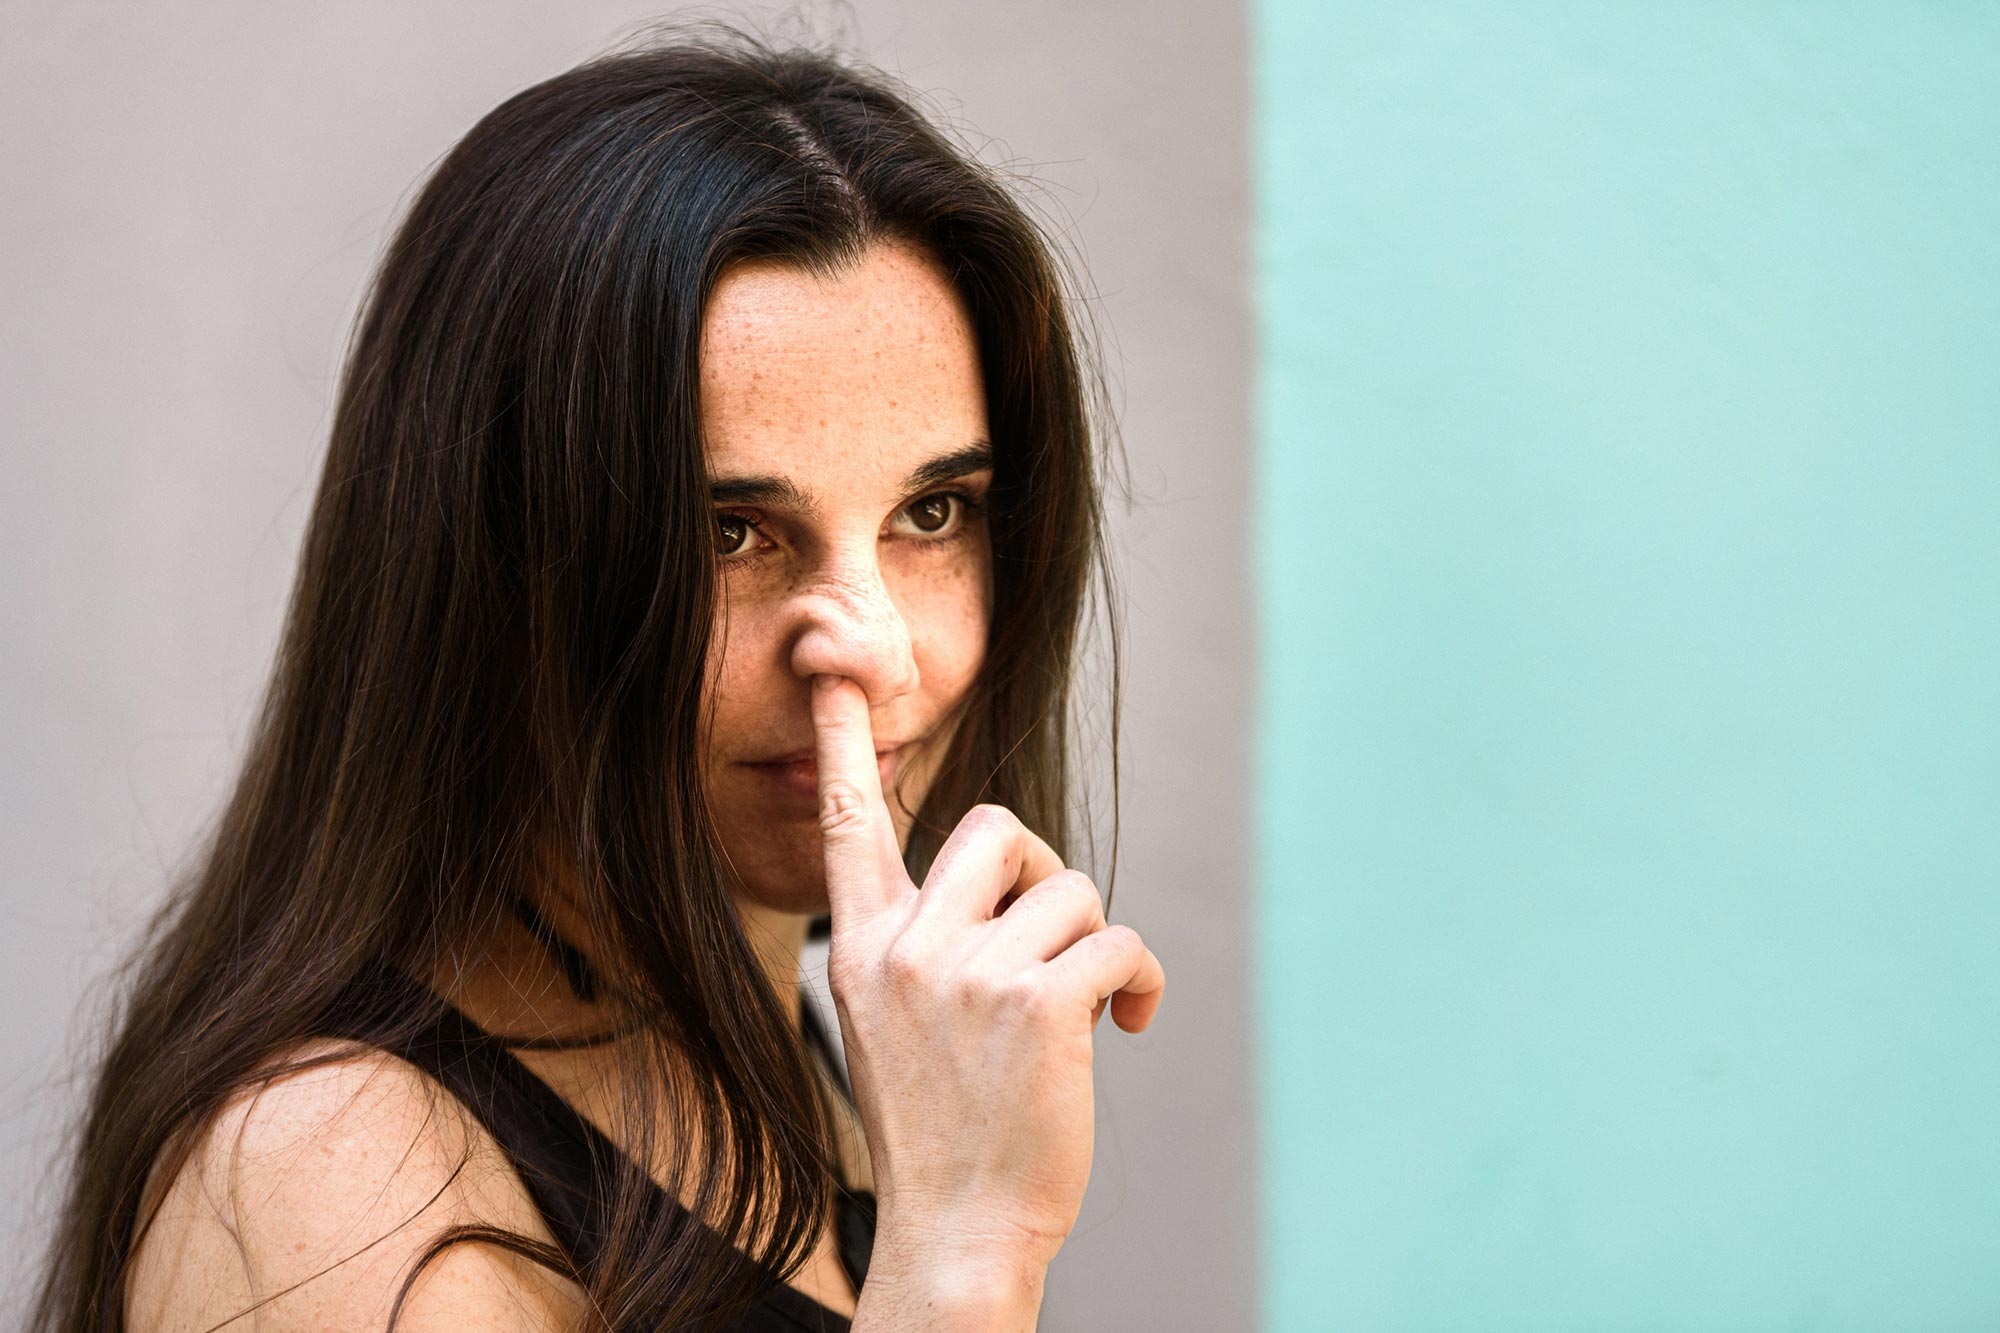 https://scitechdaily.com/images/Woman-Picking-Nose.jpg